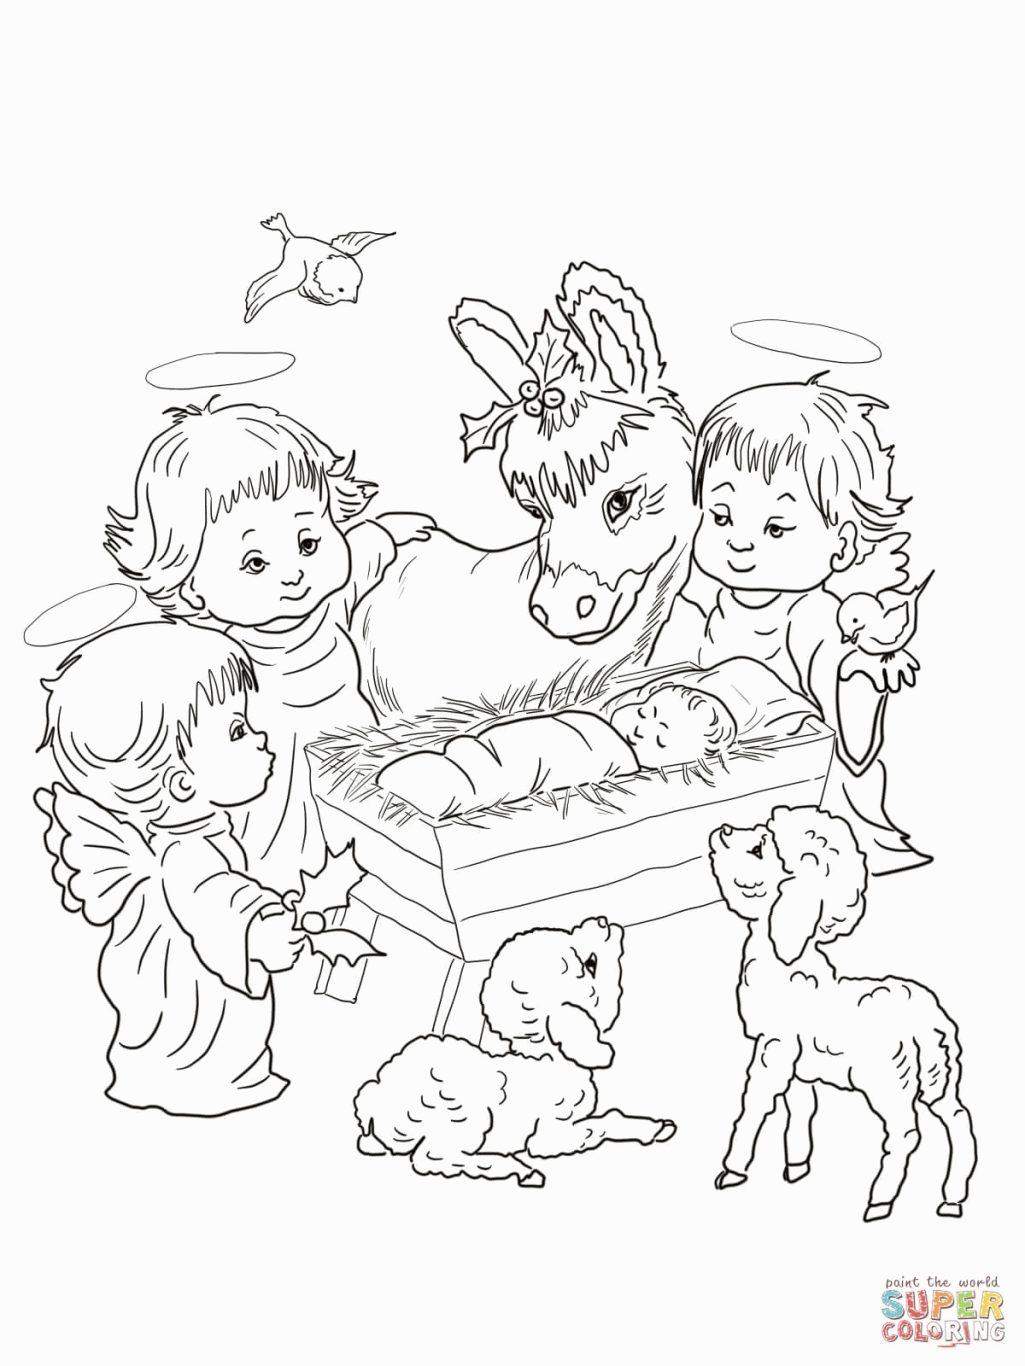 Nativity Scene With Cute Angels And Animals Coloring Page Free ...